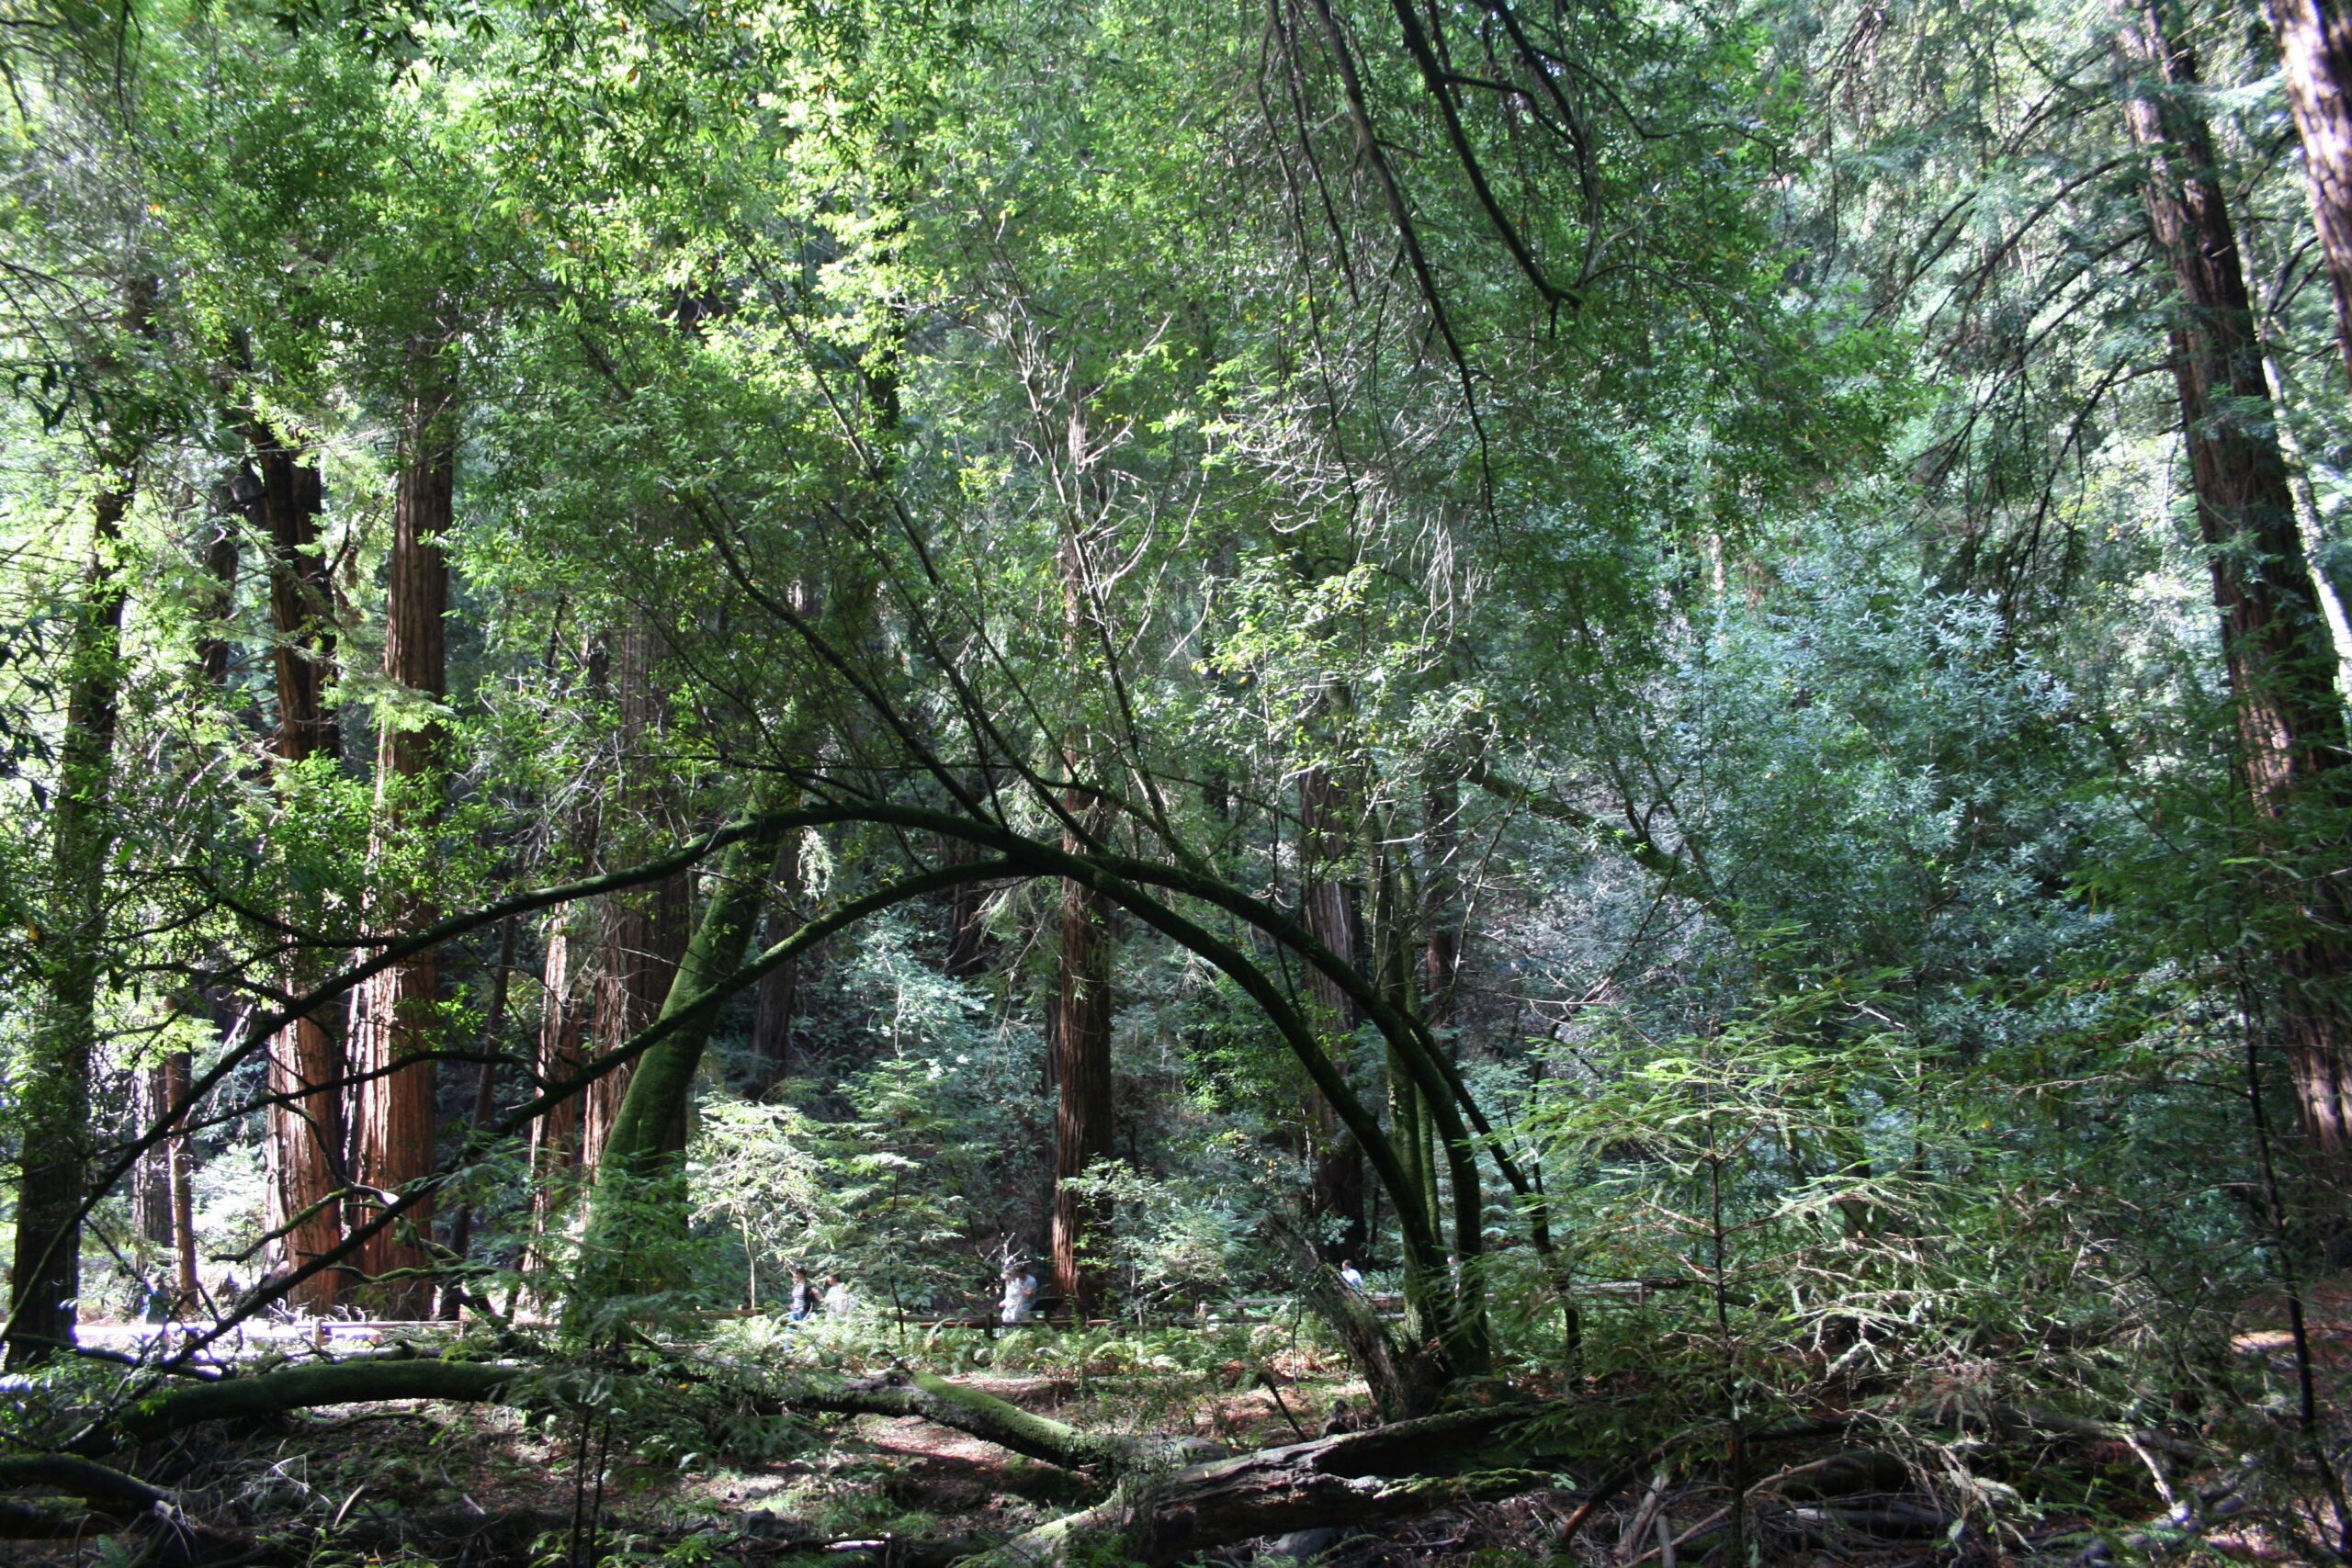 Almost half of Muir Woods is filled with old growth Coast Redwood trees.